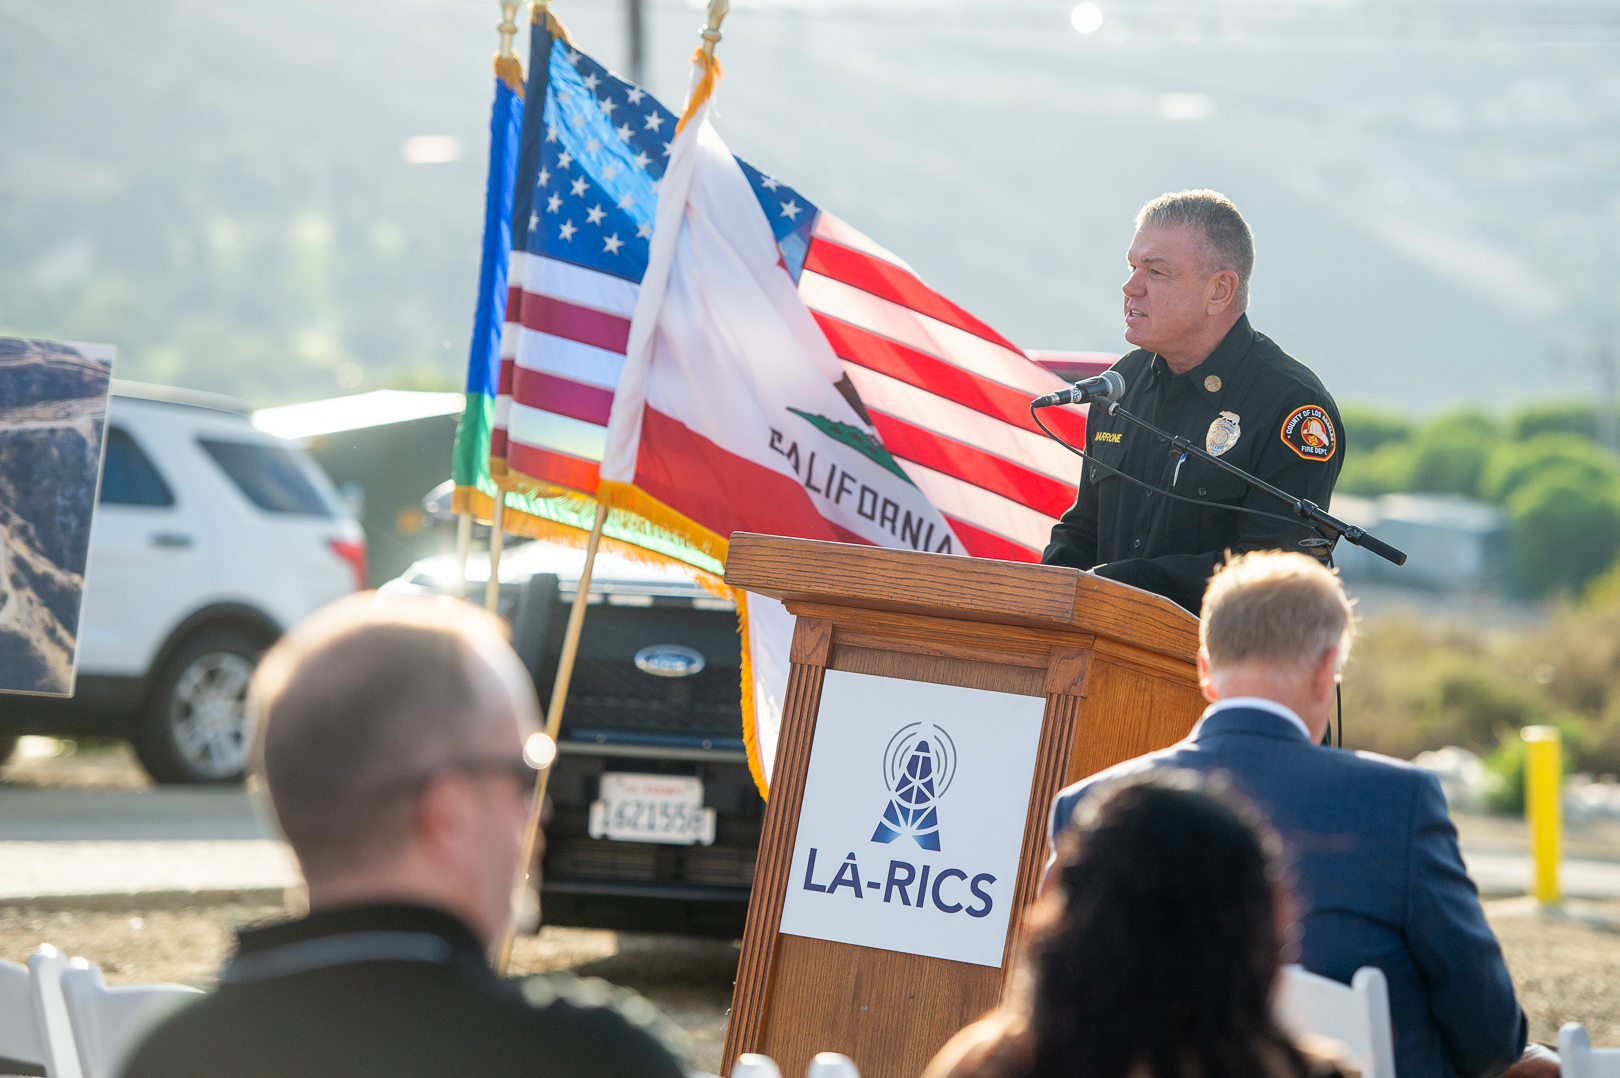 On Thursday, November 30, 2023, County of Los Angeles Fire Department (LACoFD) Fire Chief Anthony C. Marrone participated in a ribbon-cutting ceremony to celebrate the completion of the Los Angeles Regional Interoperability Communications System (LA-RICS).